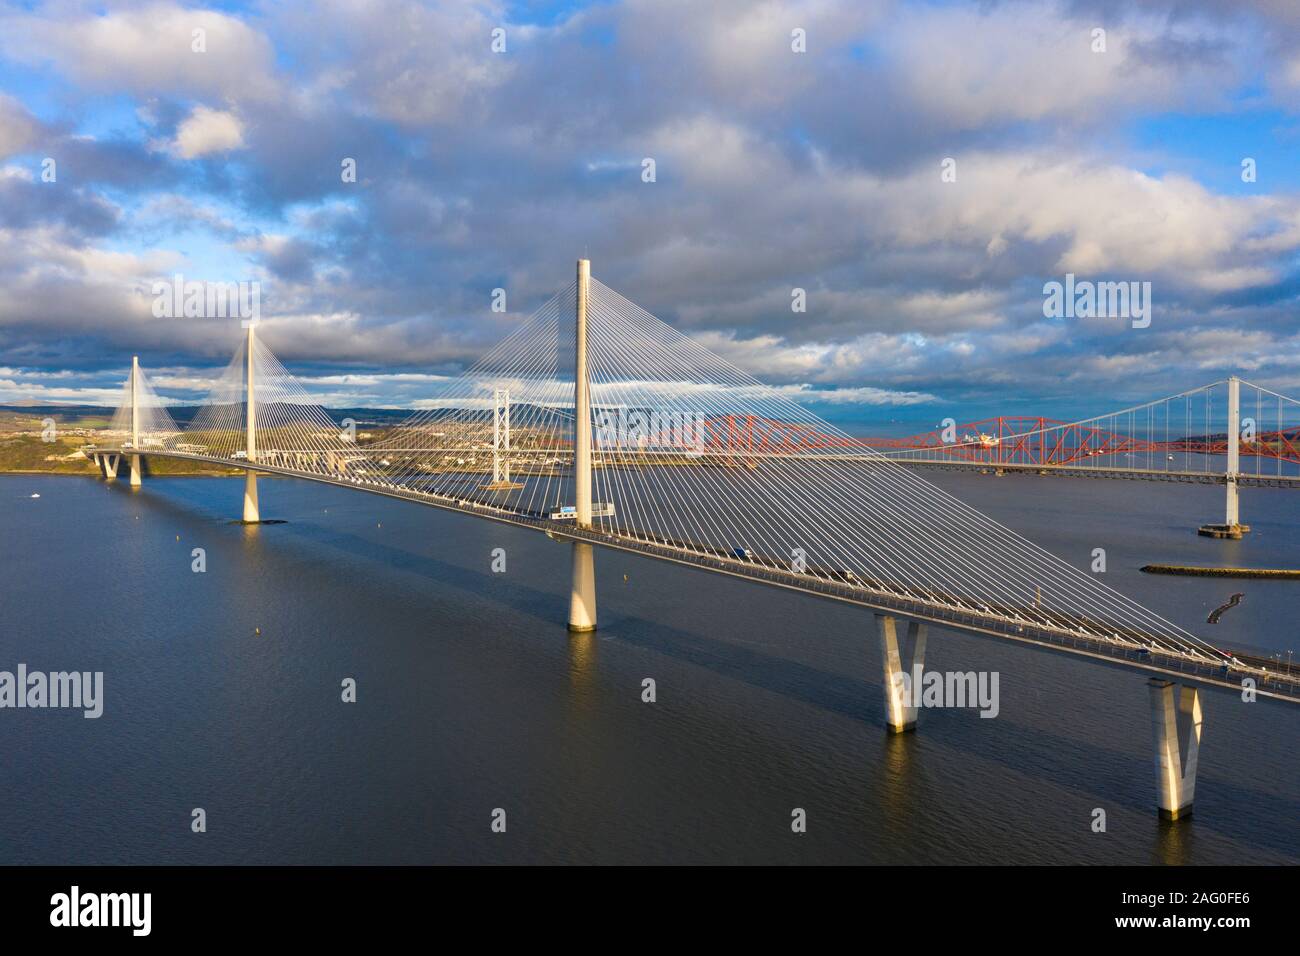 Aerial view of the Queensferry Crossing bridge spanning the Firth of Forth river in Scotland, UK. Stock Photo